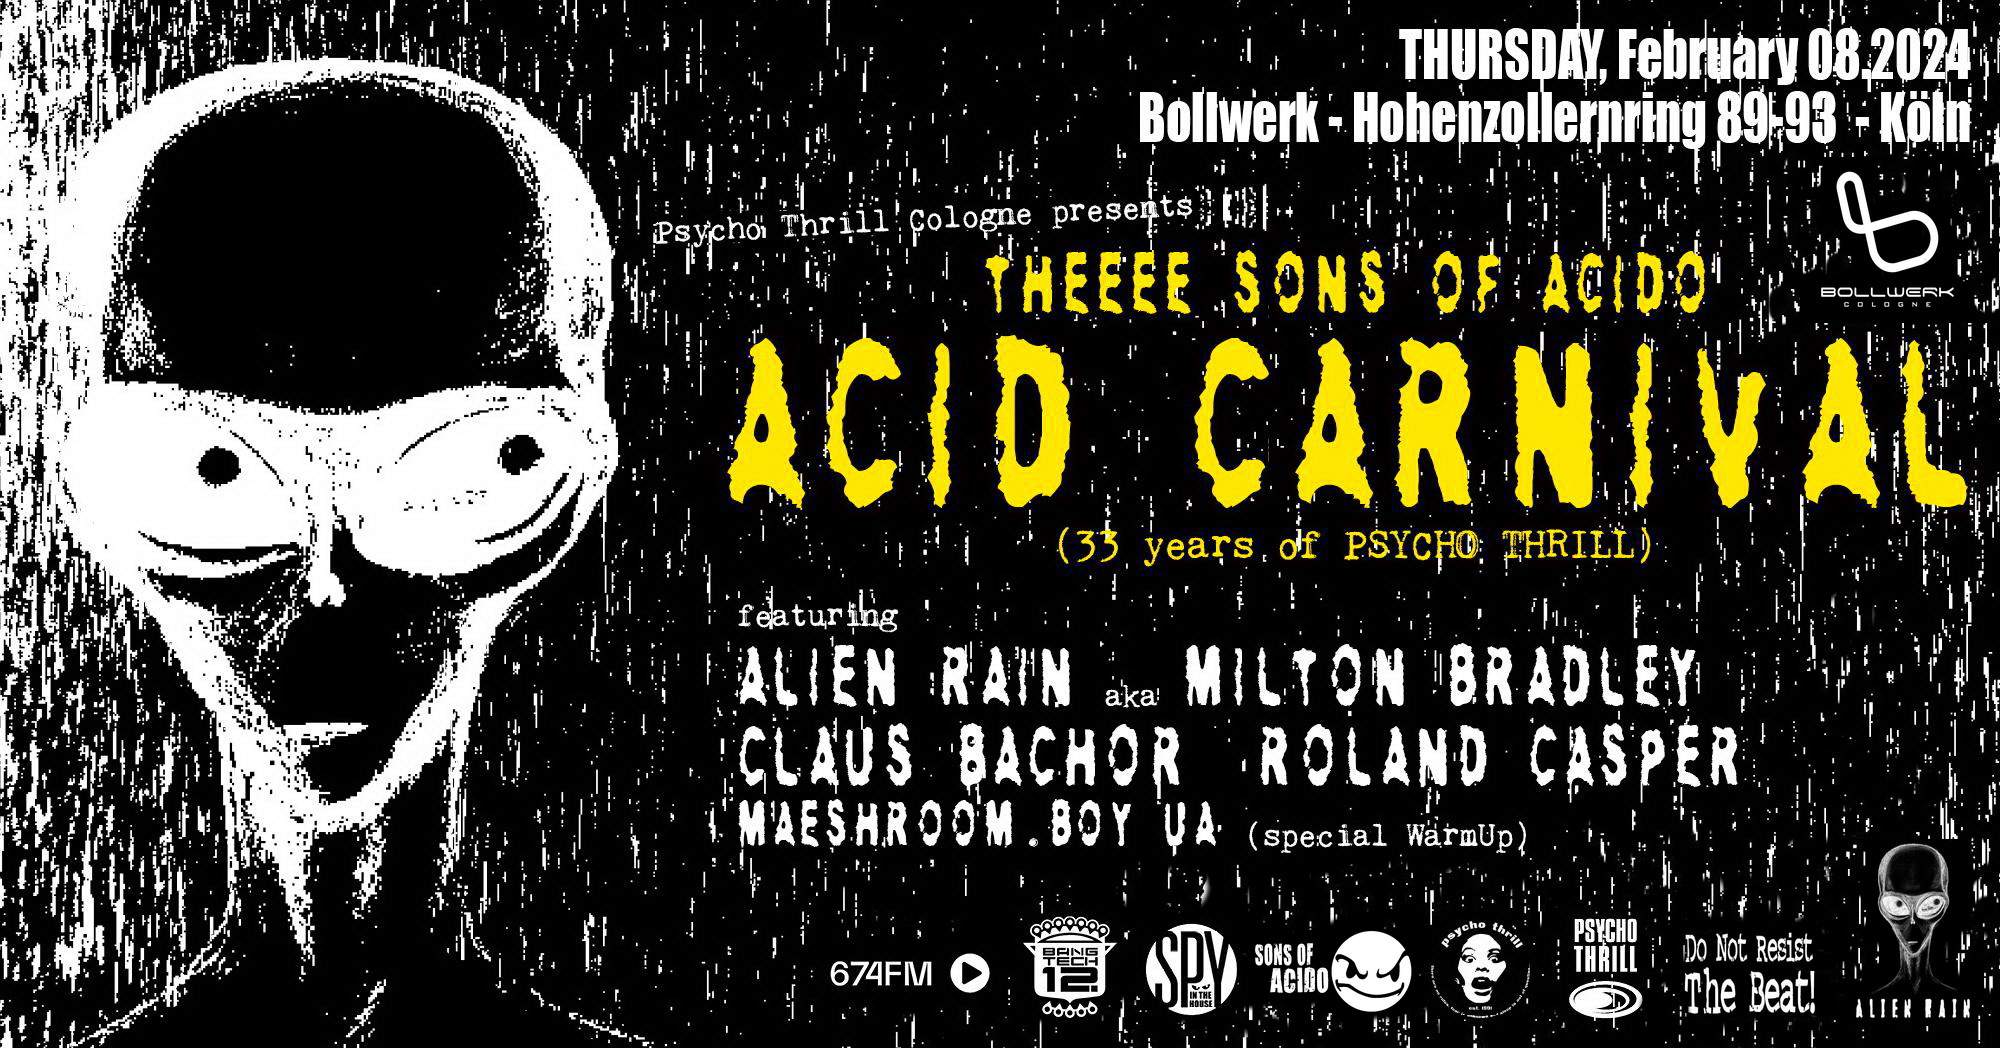 Psycho Thrill Cologne presents theeee SONS OF ACIDO 'Acid Carnival' [33 years of PSYCHO THRILL] - フライヤー表